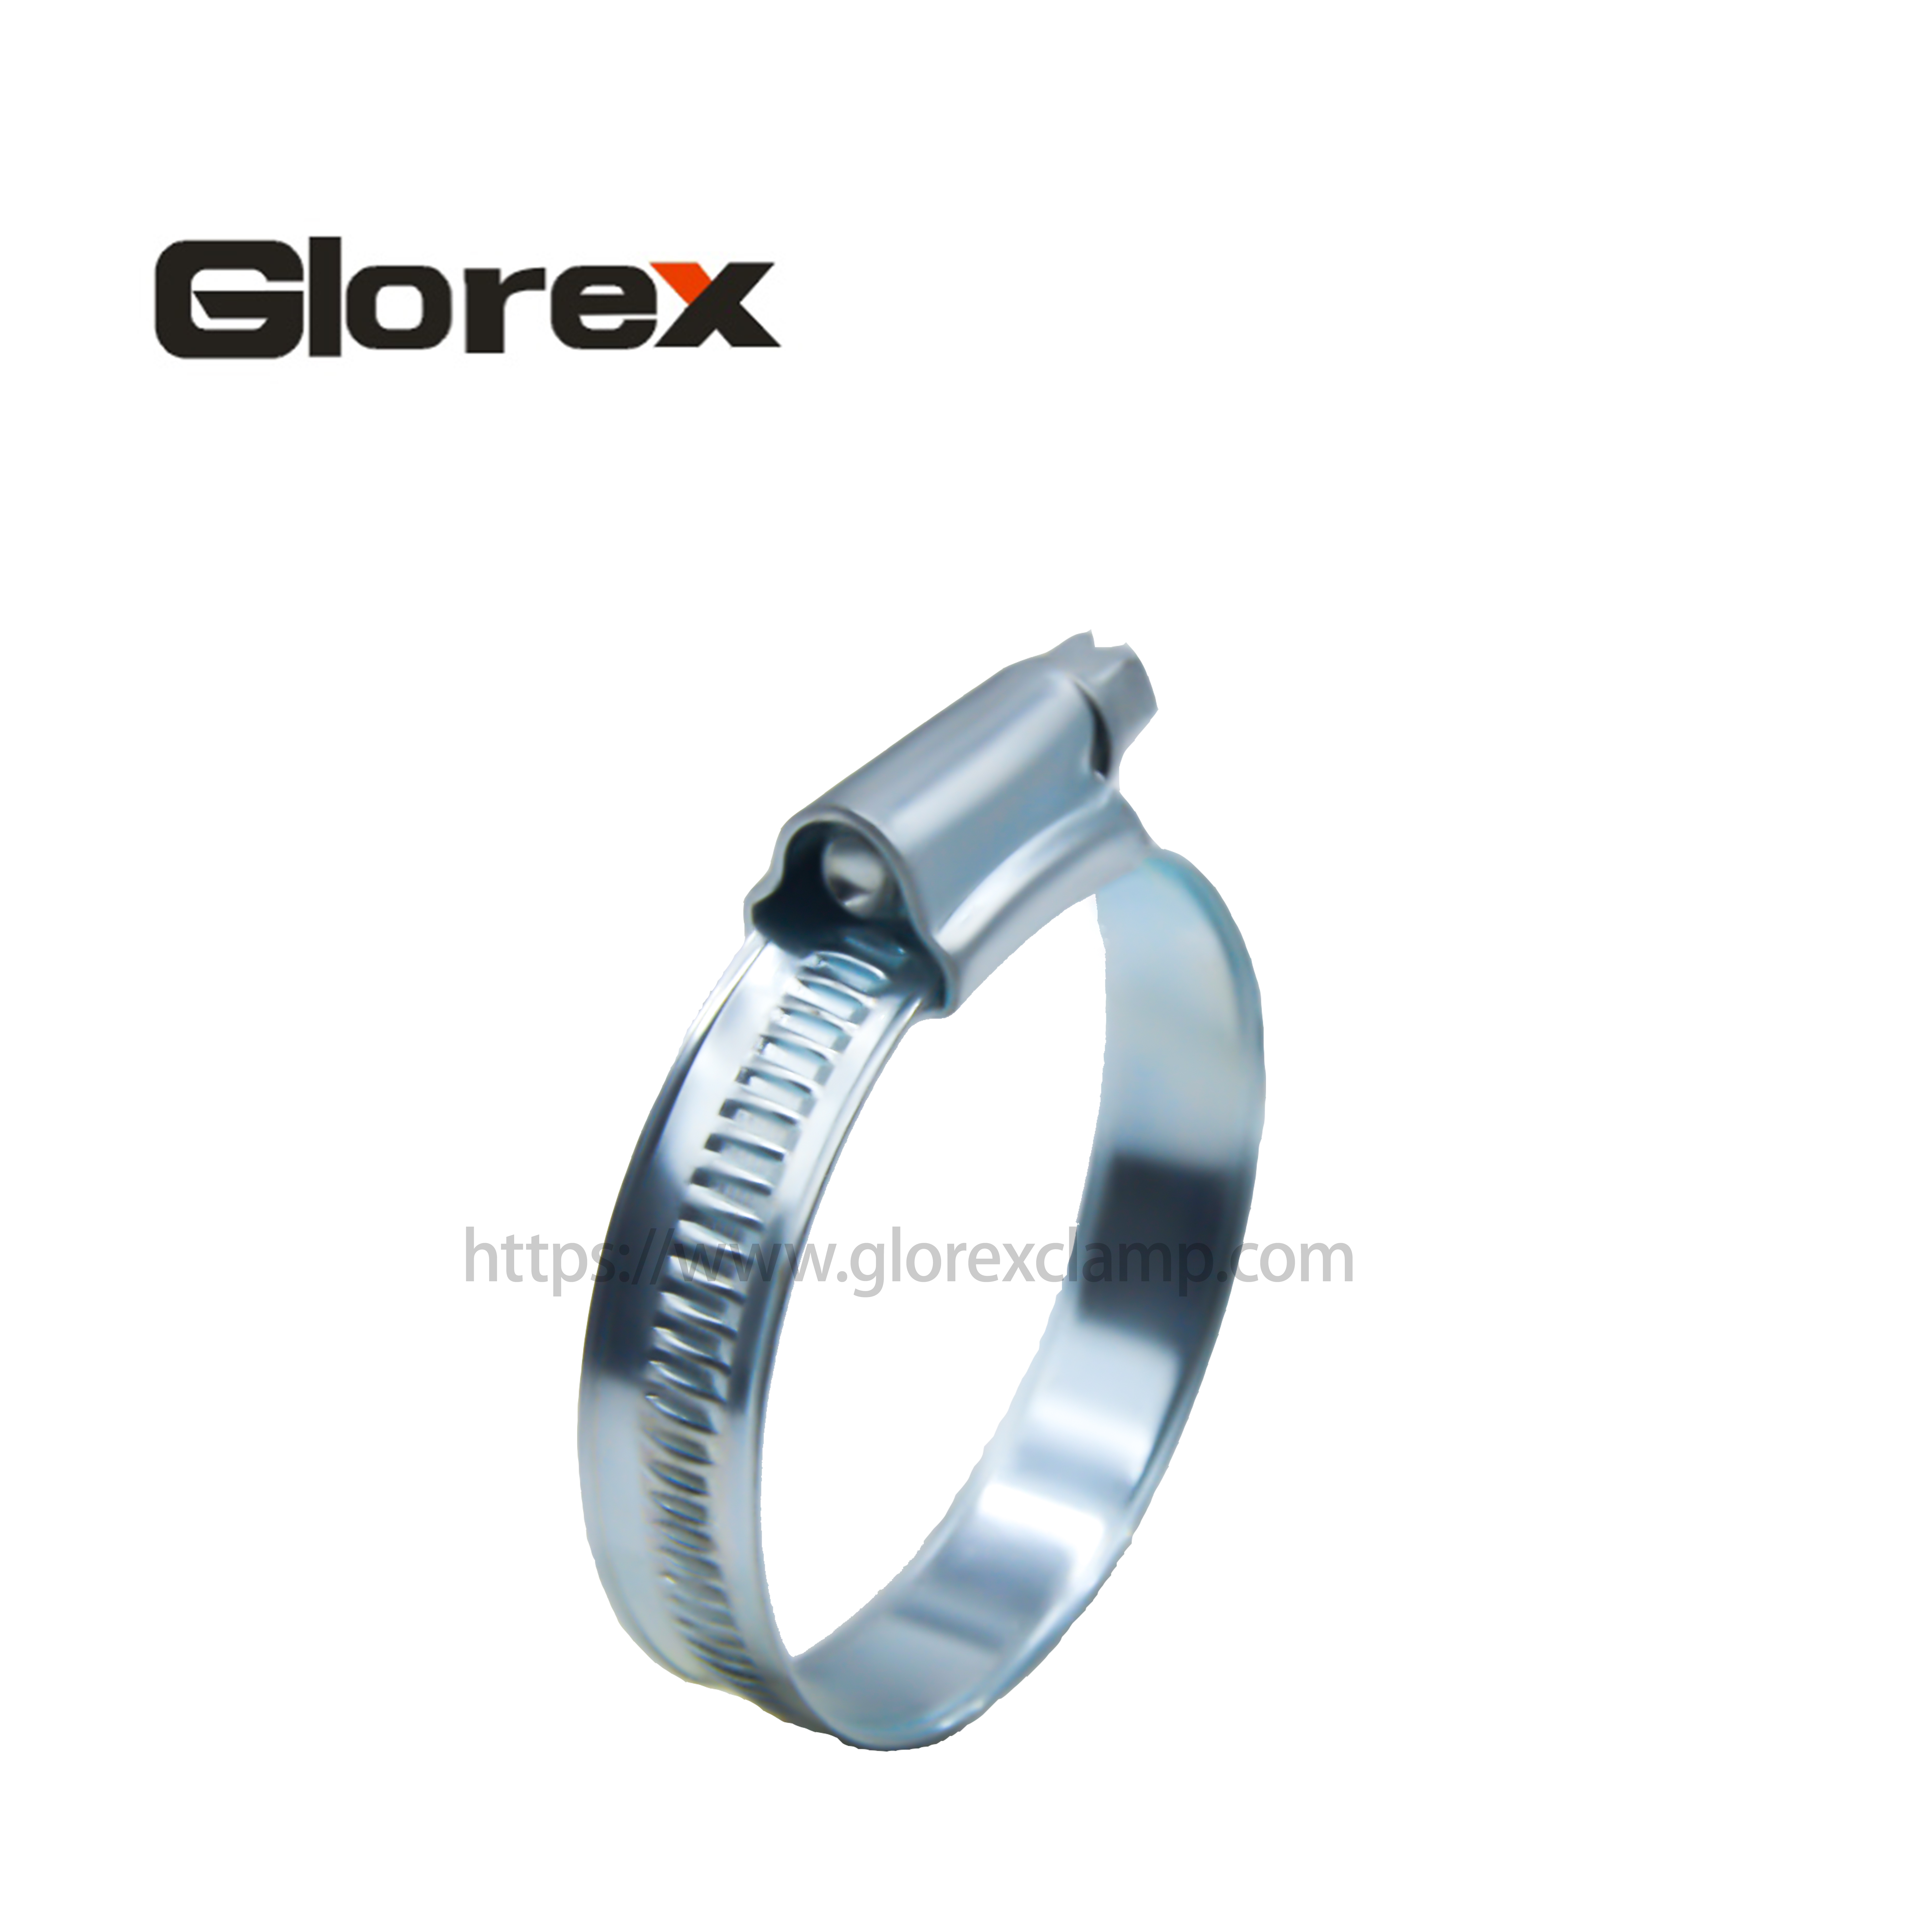 2020 Good Quality 7 Inch Hose Clamp - British type hose clamp with welding – Glorex